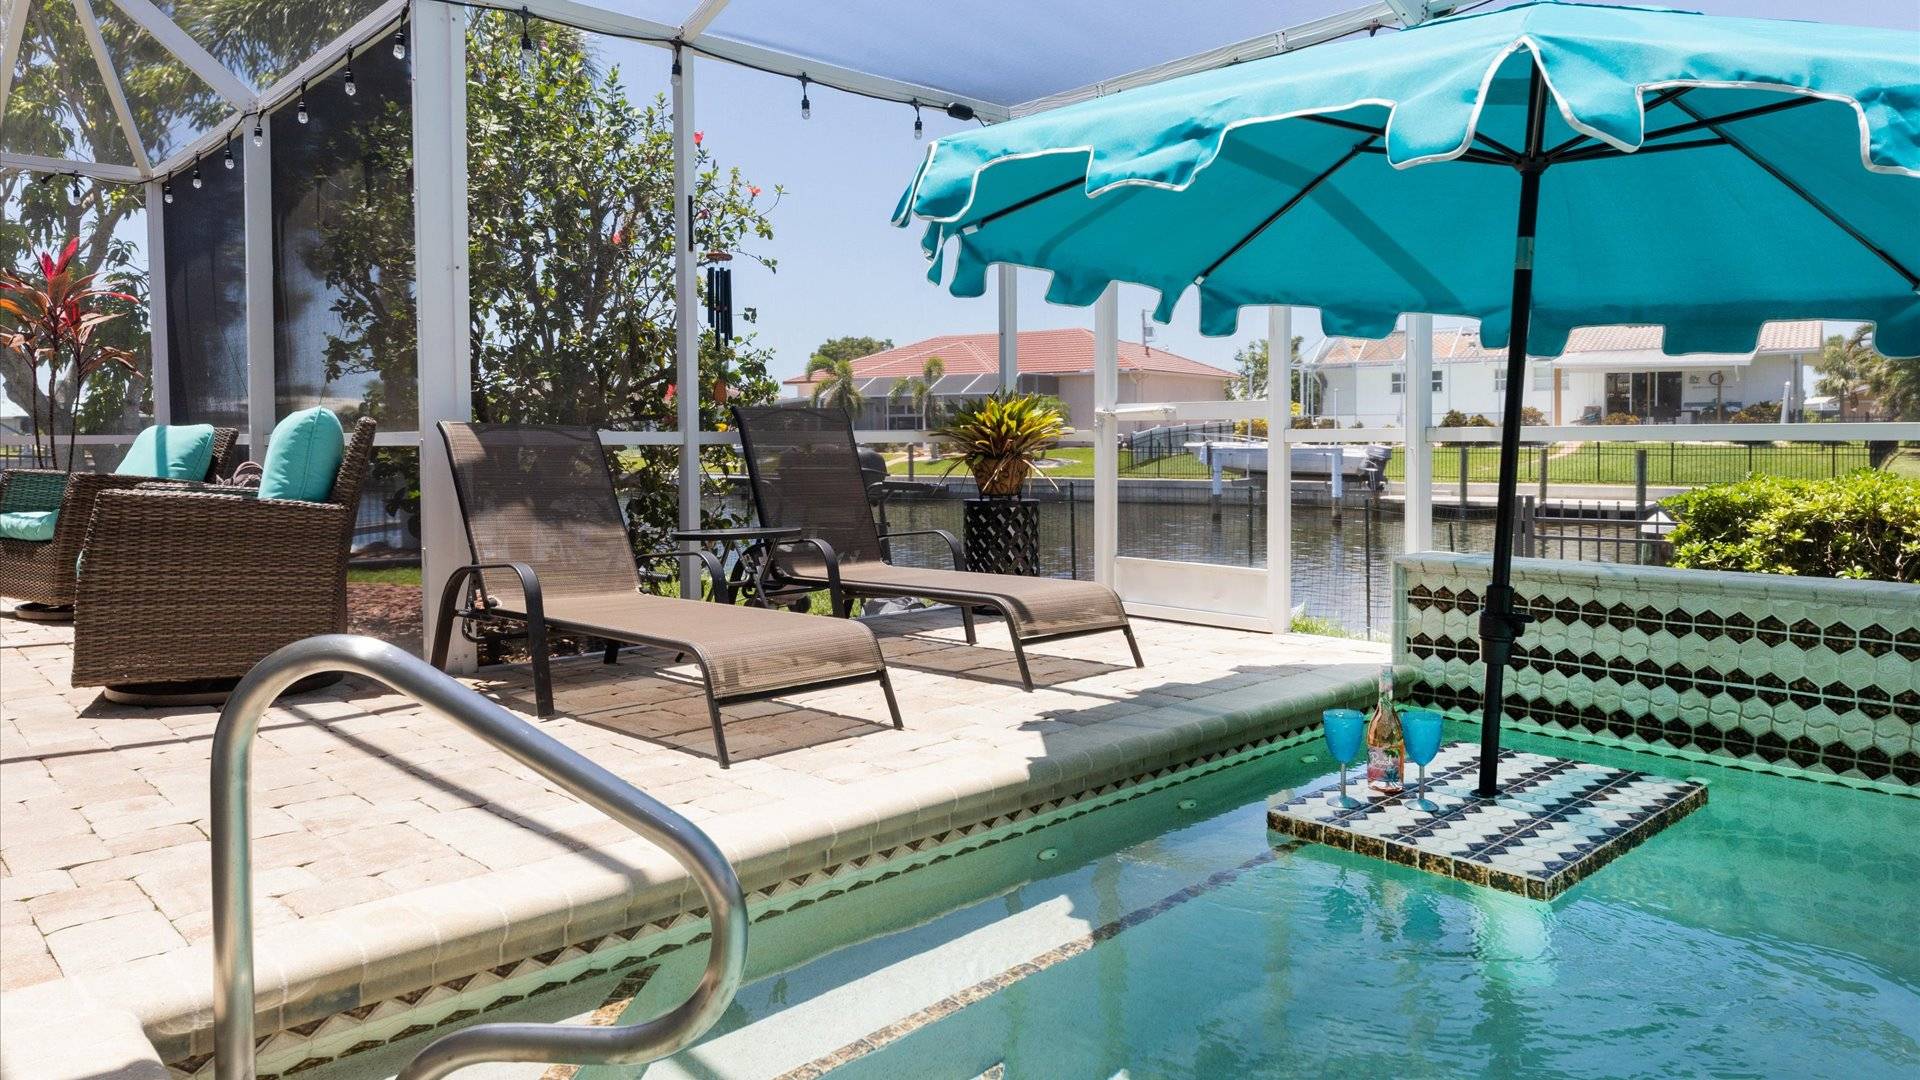 Soak up the beautiful Florida sunshine in your own private pool along the canal waters